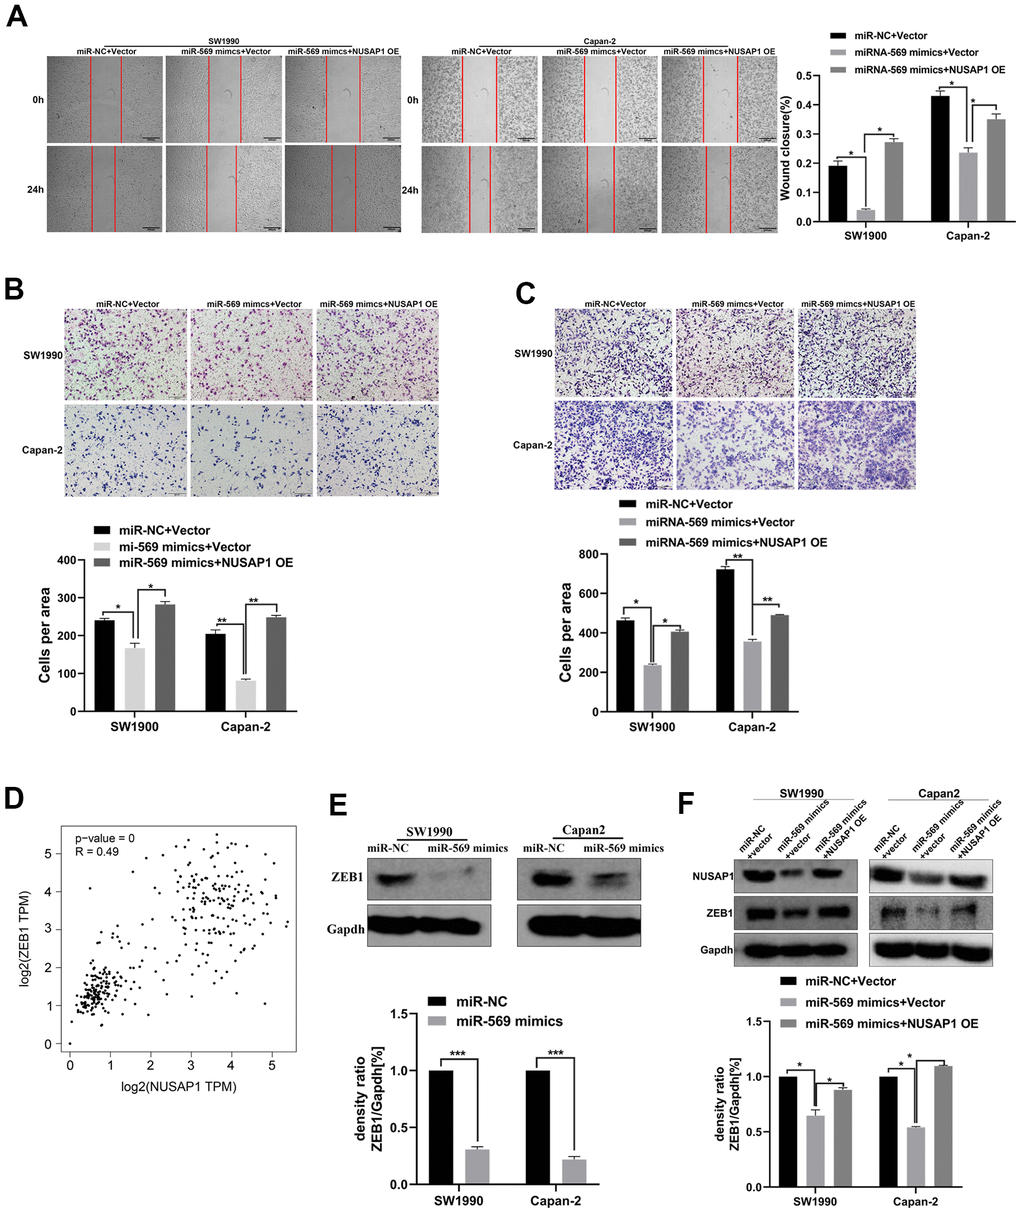 miR-569/NUSAP1/ZEB1 axis involved in the metastasis of PC cells. (A) Wound healing showed the migratory abilities of PC cells transfected with a combination of miR-NC and vector, or miR-569 mimics and vector, or miR-569 mimics and NUSAP1 OE; (B) Transwell assay showed the migratory abilities of PC cells transfected with a combination of miR-NC and vector, or miR-569 mimics and vector or miR-569 mimics and NUSAP1 OE; (C) Transwell assay demonstrated the invasive abilities of PC cells transfected with a combination of miR-NC and vector, or miR-569 mimics and vector or miR-569 mimics and NUSAP1 OE; (D) The GEPIA database showed that a significant positive correlation between NUSAP1 and ZEB1 could be observed in PC tissues. (E) Western blot assay showed the ZEB1 protein expression level after over-expression of miR-569. (F) Western blot assay showed the protein expression levels of PC cells transfected with a combination of miR-NC and vector, or miR-569 mimics and vector or miR-569 mimics and NUSAP1 OE; (* p  0.05, ** p  0.01, n = 5, Student’s t-test, means ± 95% CI).